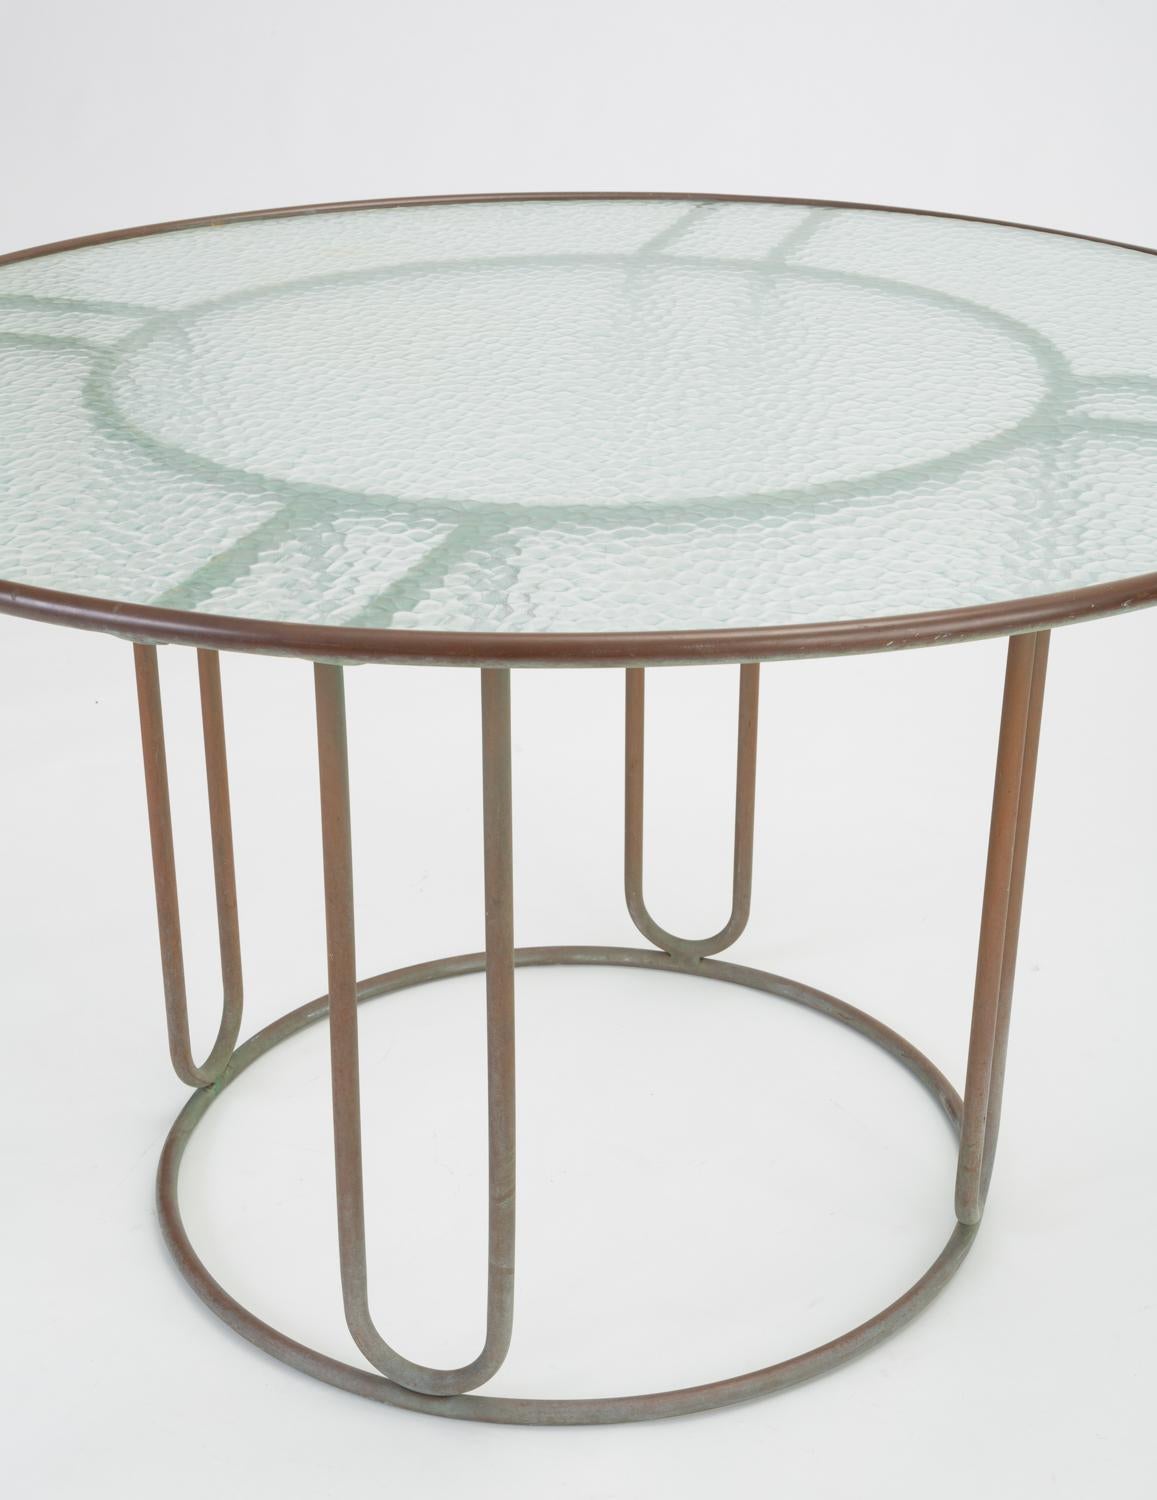 Hammered Round Patio Table with Oxidized Bronze Frame by Walter Lamb for Brown Jordan